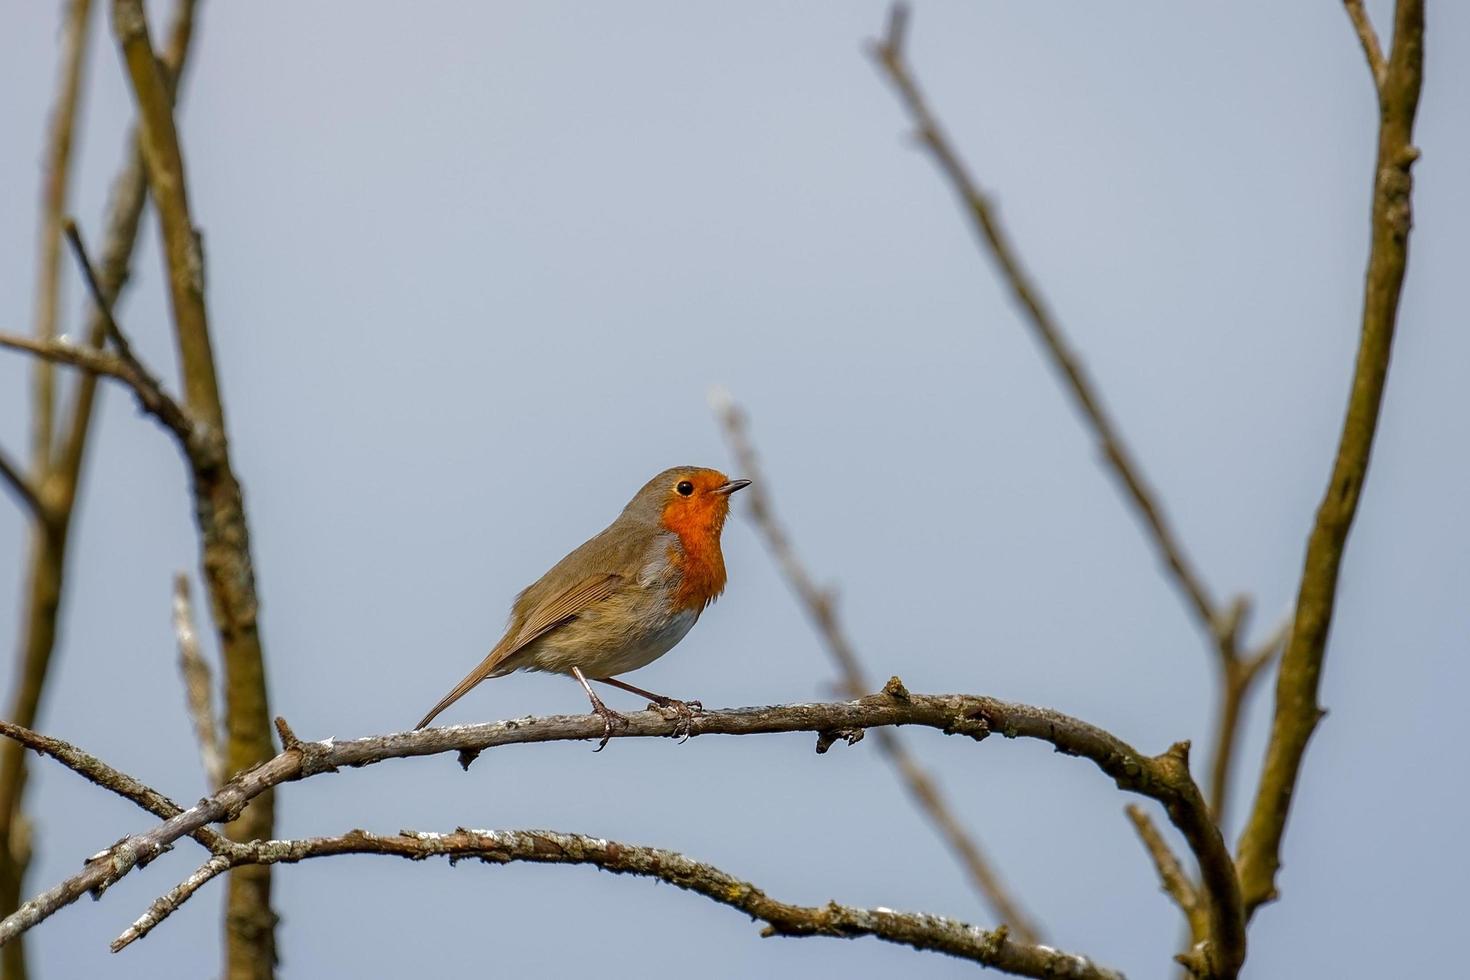 Robin perched on a branch in springtime photo